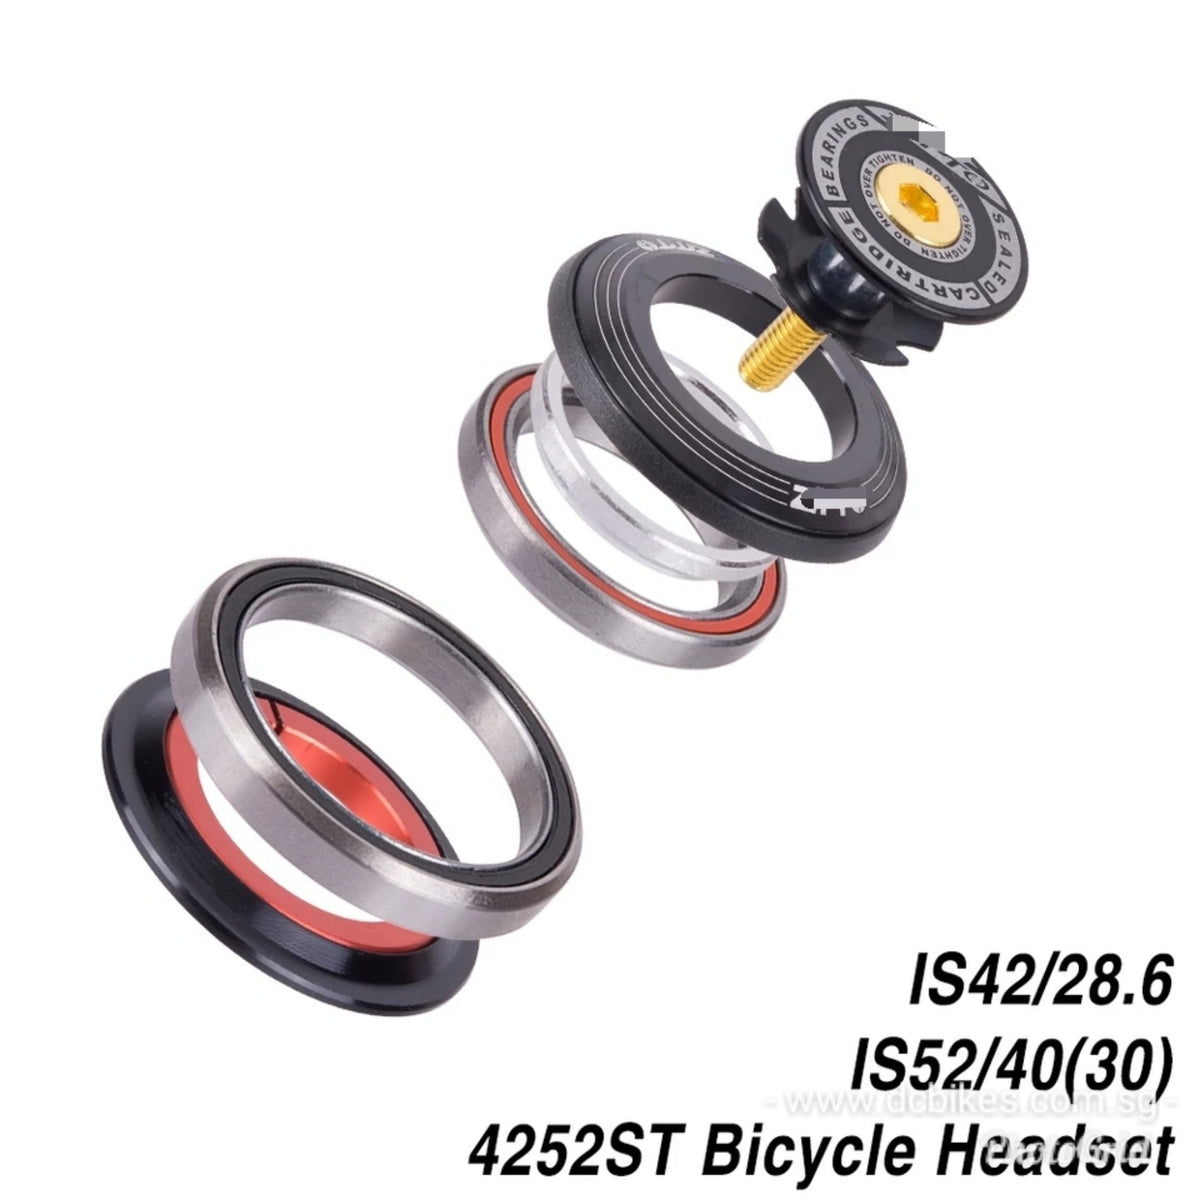 34mm EC34 1 1/8 Straight 28.6 Sealed Bearing Bicycle Headset – Dcbikes